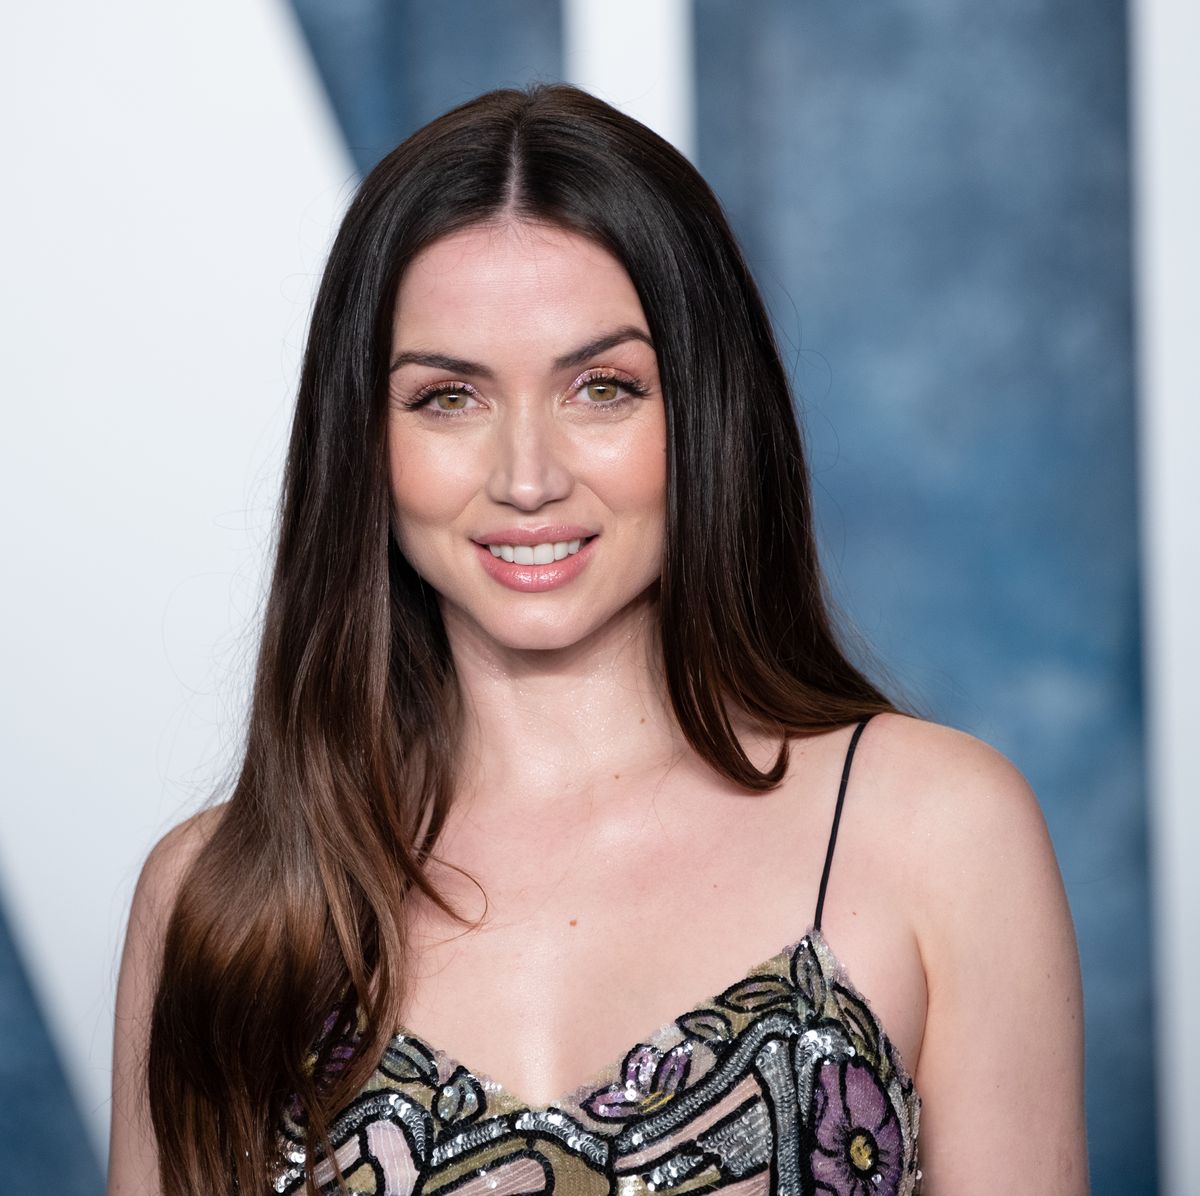 Ana de Armas lands next movie role in thriller with Marvel stars